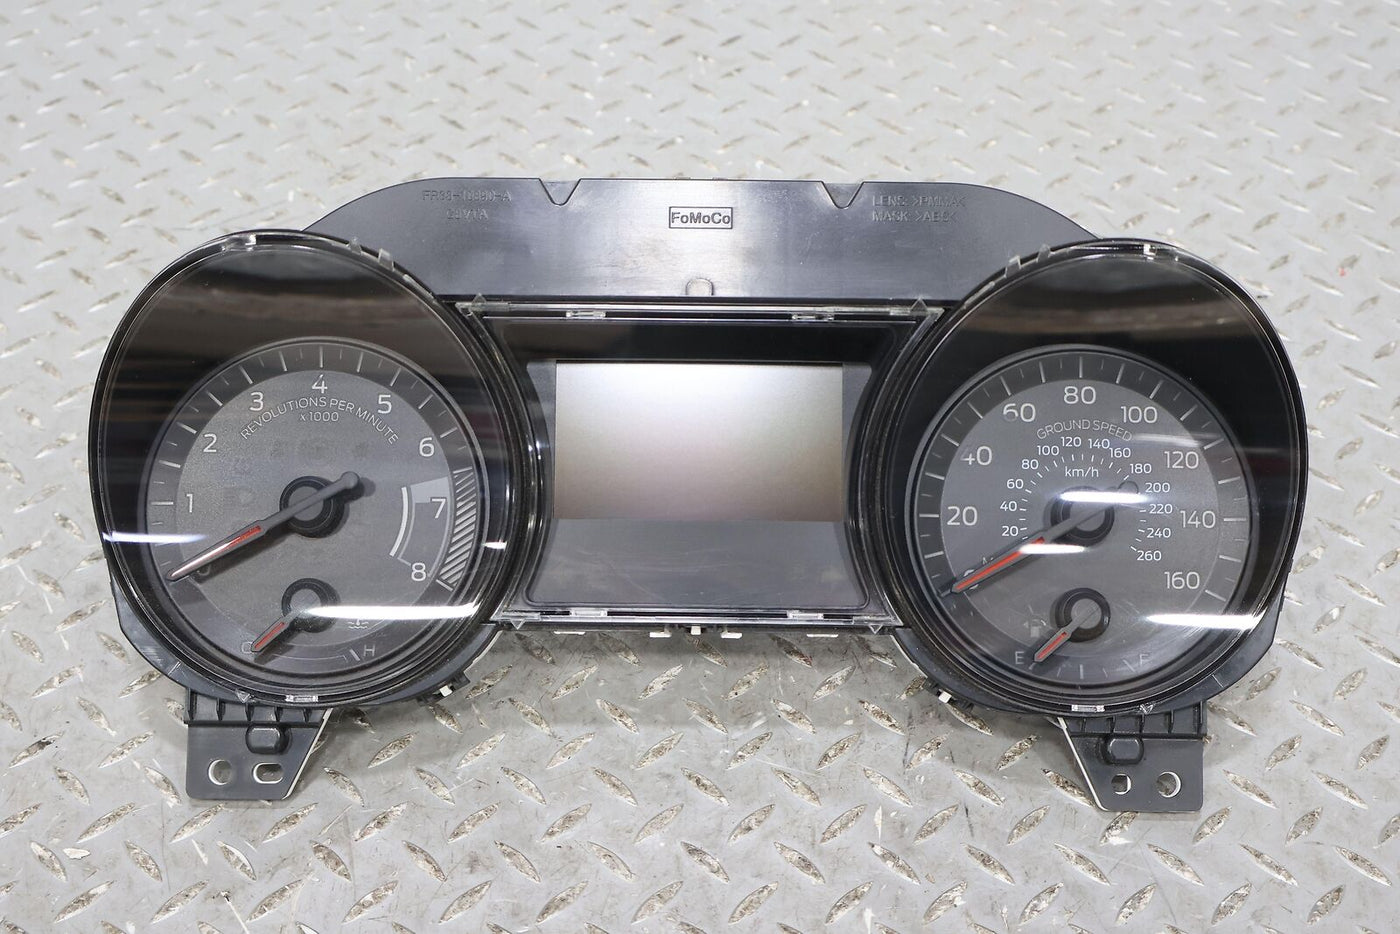 16-17 Ford Mustang GT 160MPH Speedometer Gauge Cluster (FR3T-10849-CG) Tested